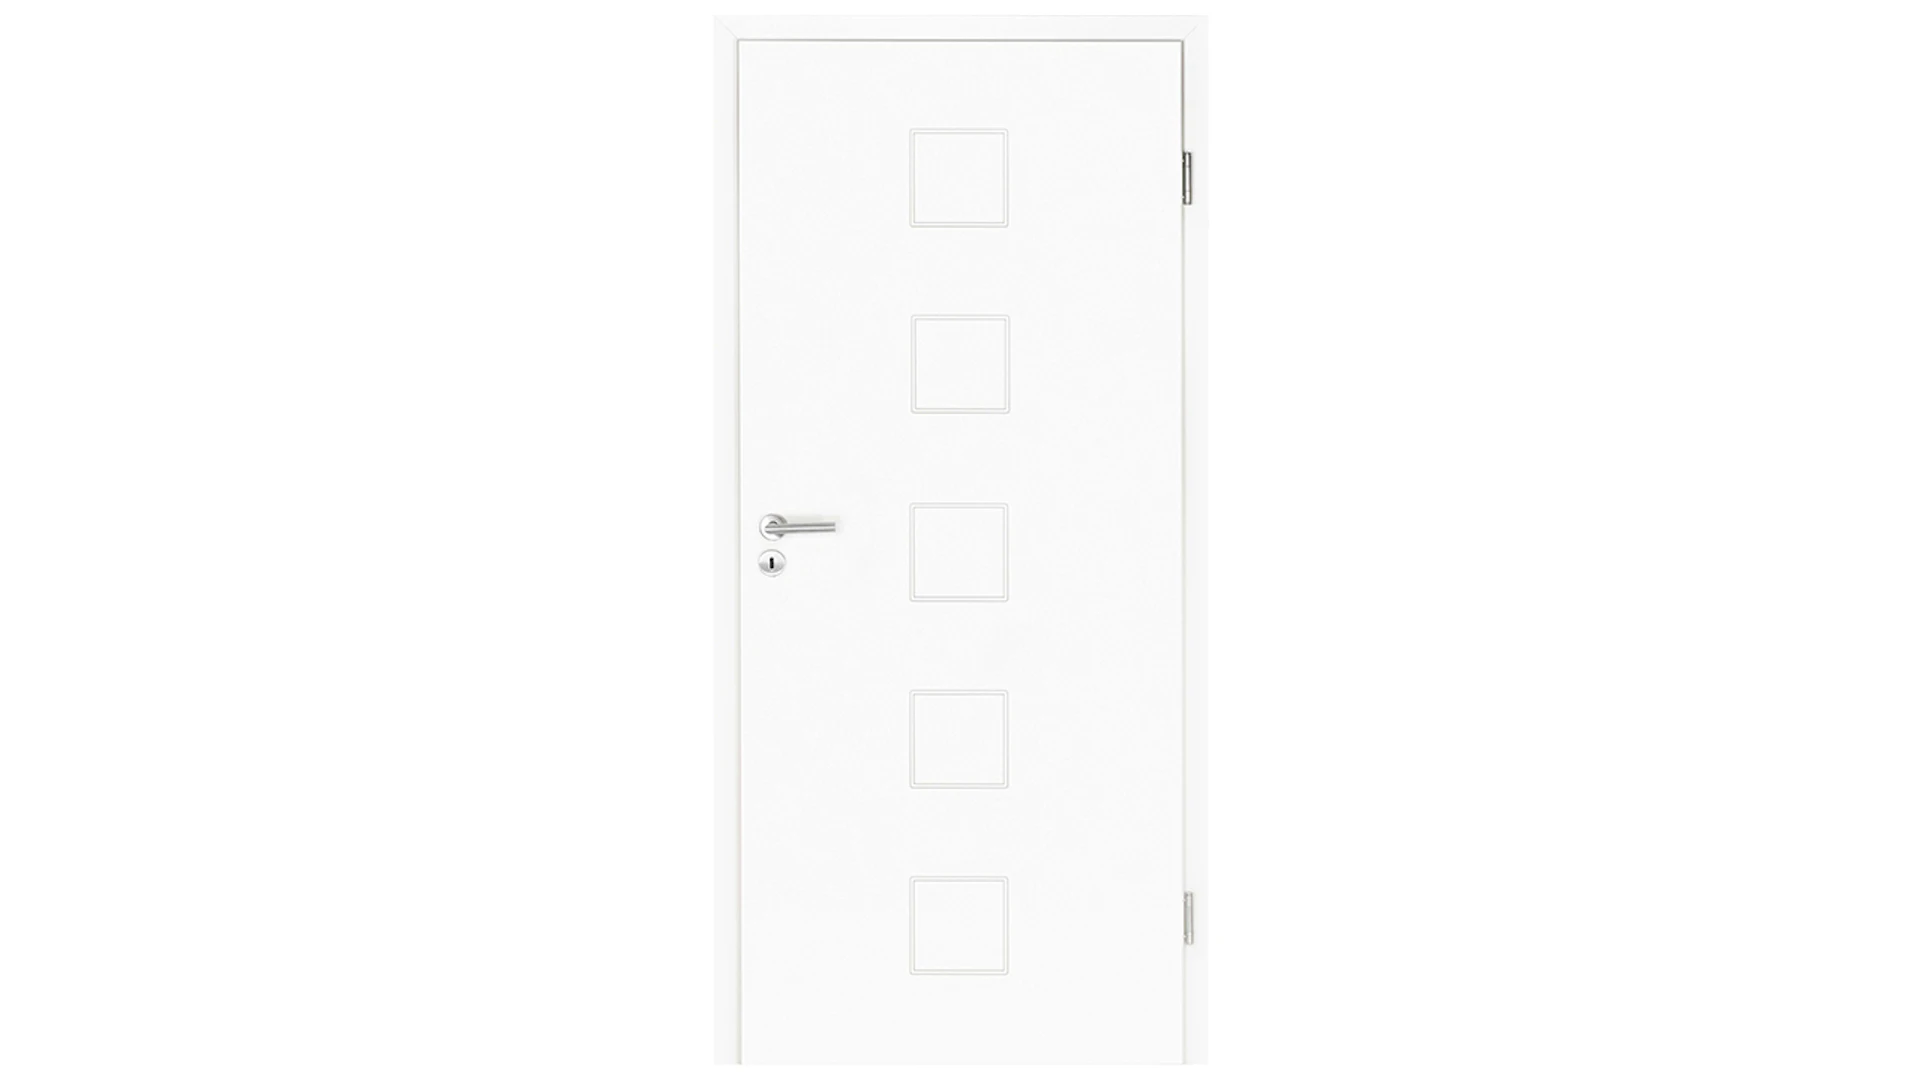 planeo interior door lacquer 2.0 - Keno 9010 white lacquer 1985 x 610 mm DIN R - round RSP hinge 3-t